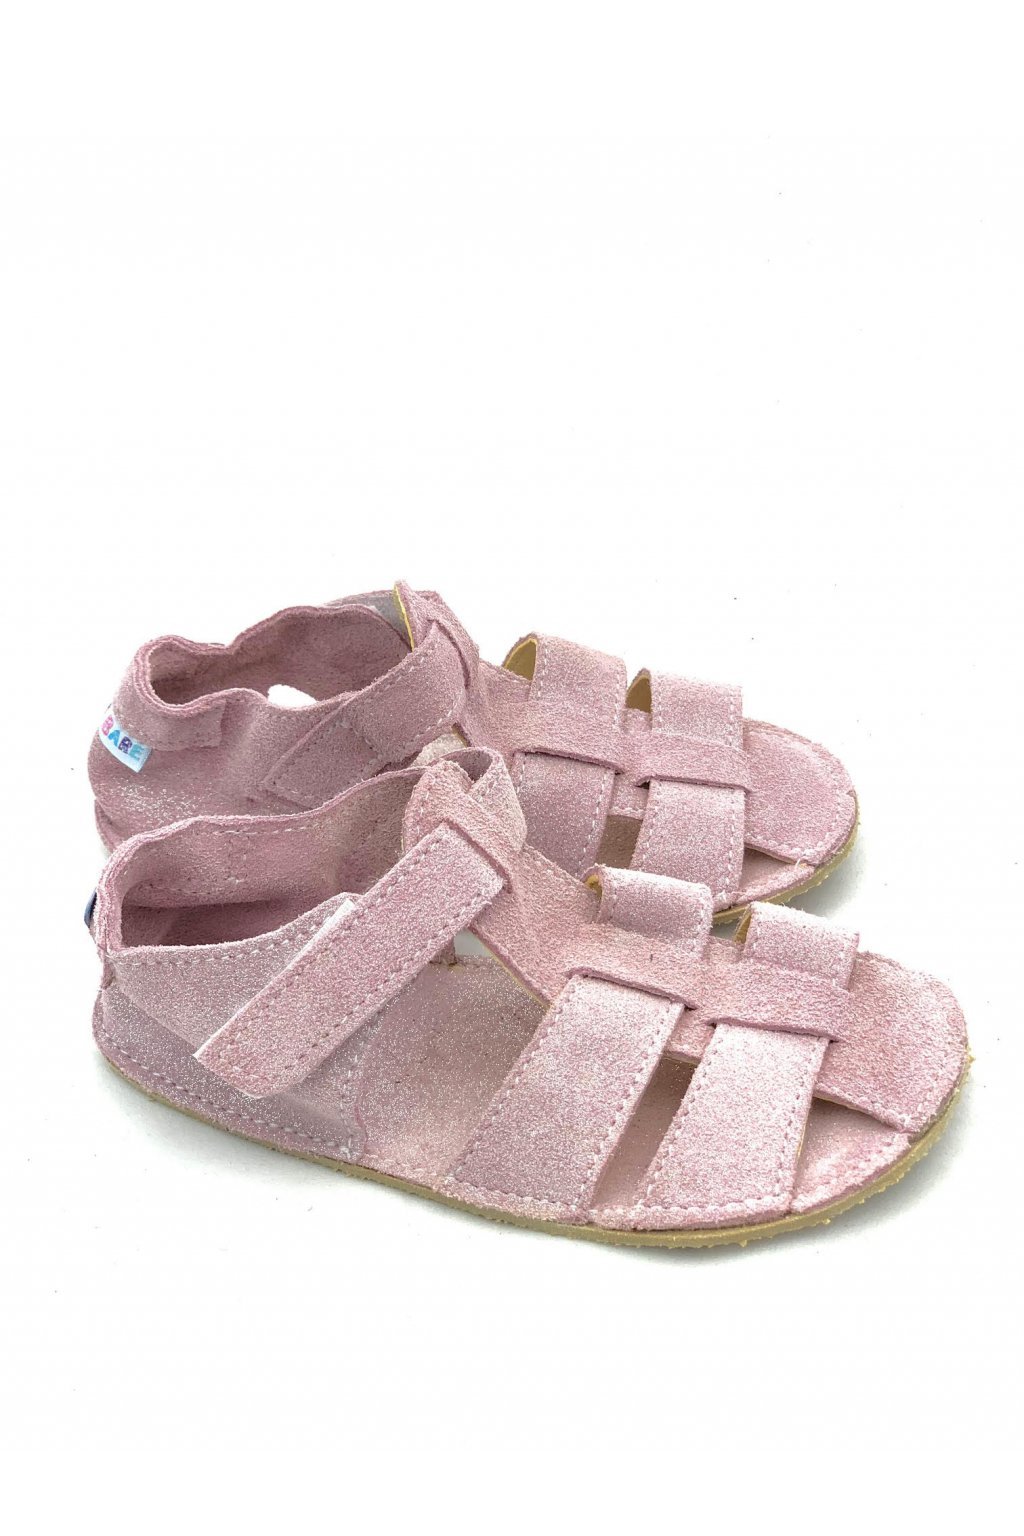 Baby Bare Sparkle Pink sandals